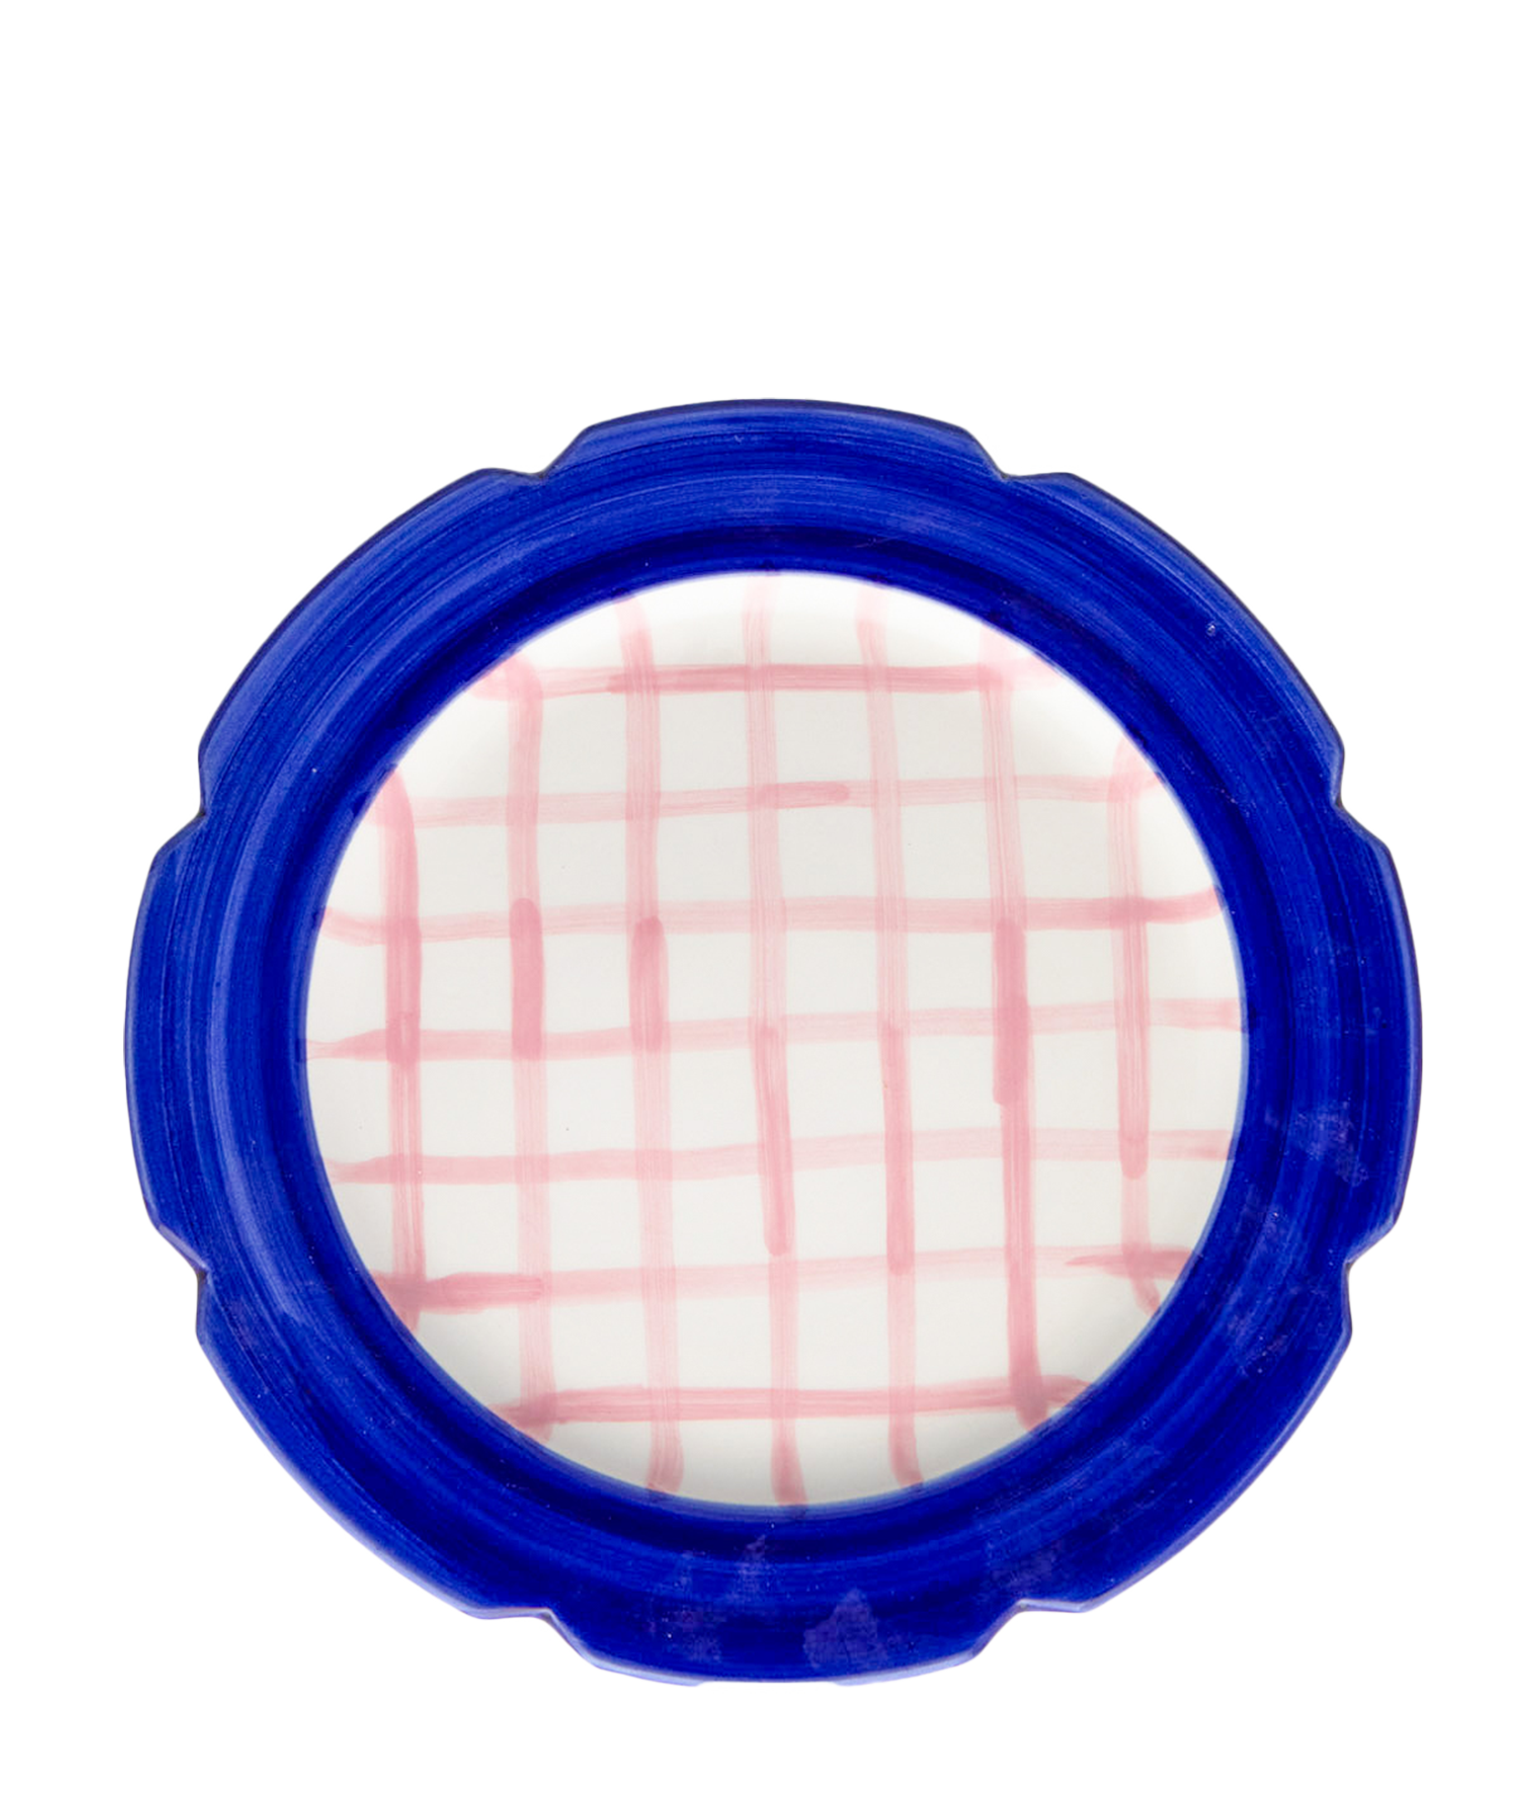 Hot Cakes Cake Stand, Navy/Pink